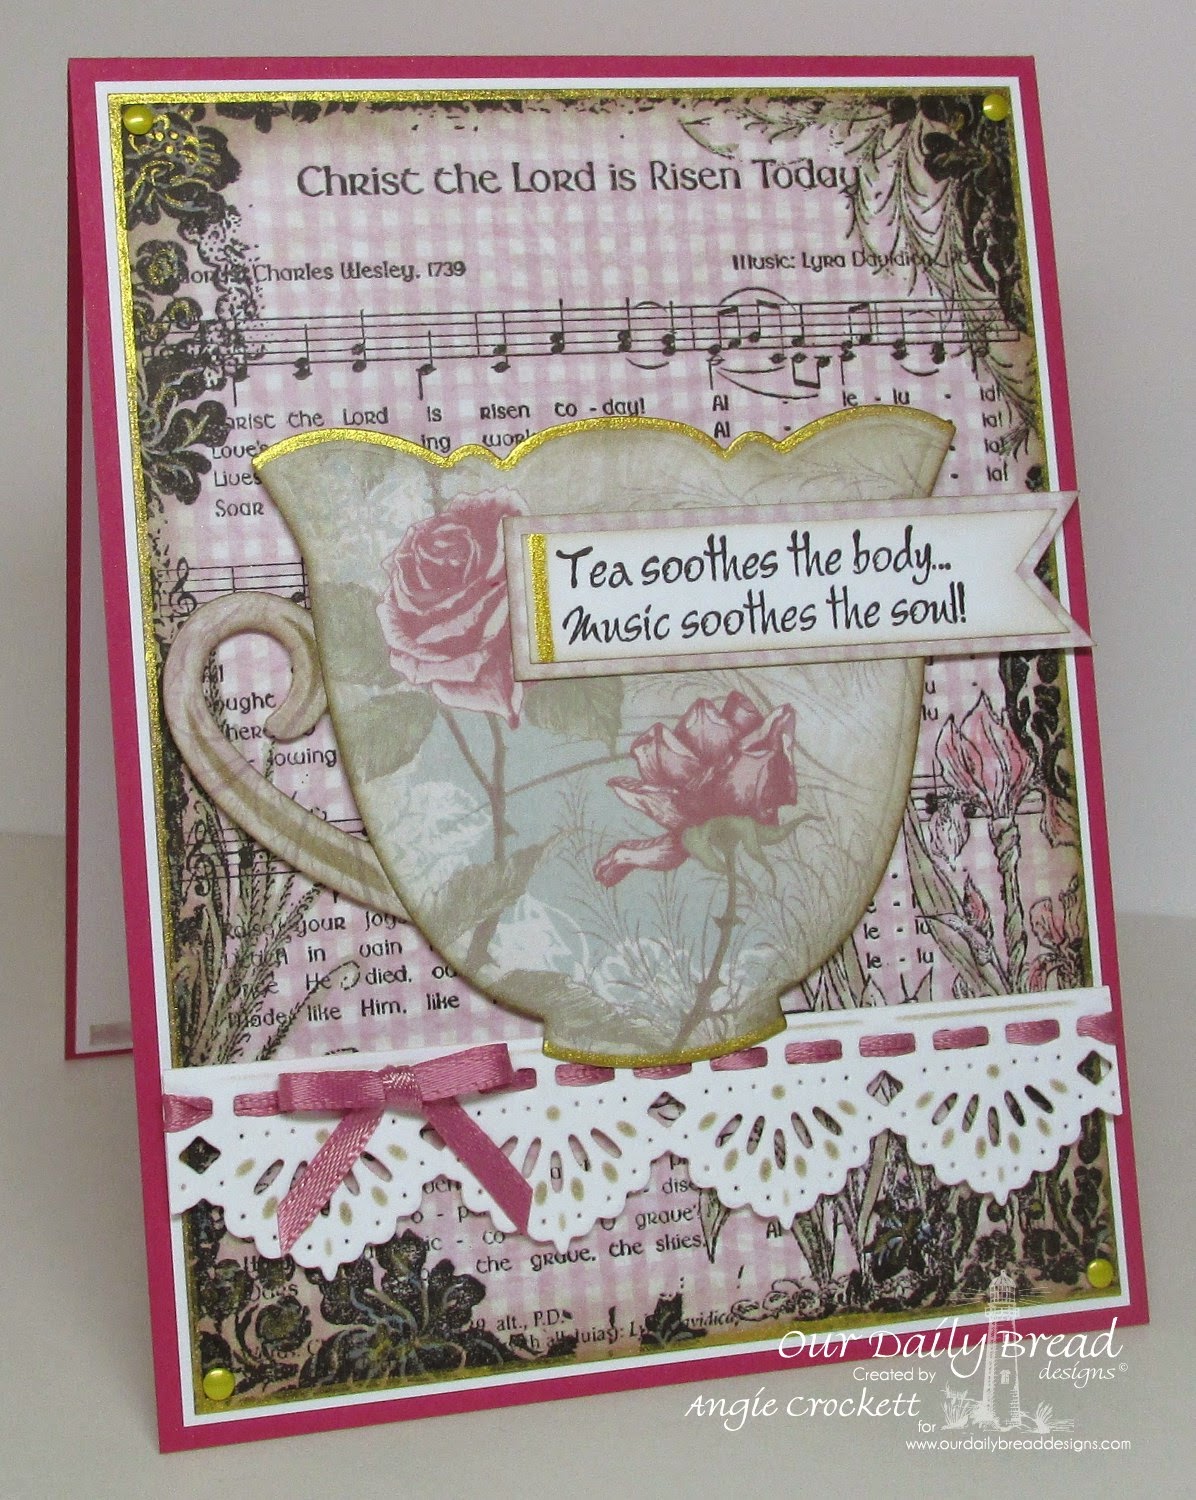 ODBD Shabby Rose Paper Collection, ODBD Custom Beautiful Border Dies, ODBD Christ the Lord Background, ODBD Just A Note, Card Designer Angie Crockett